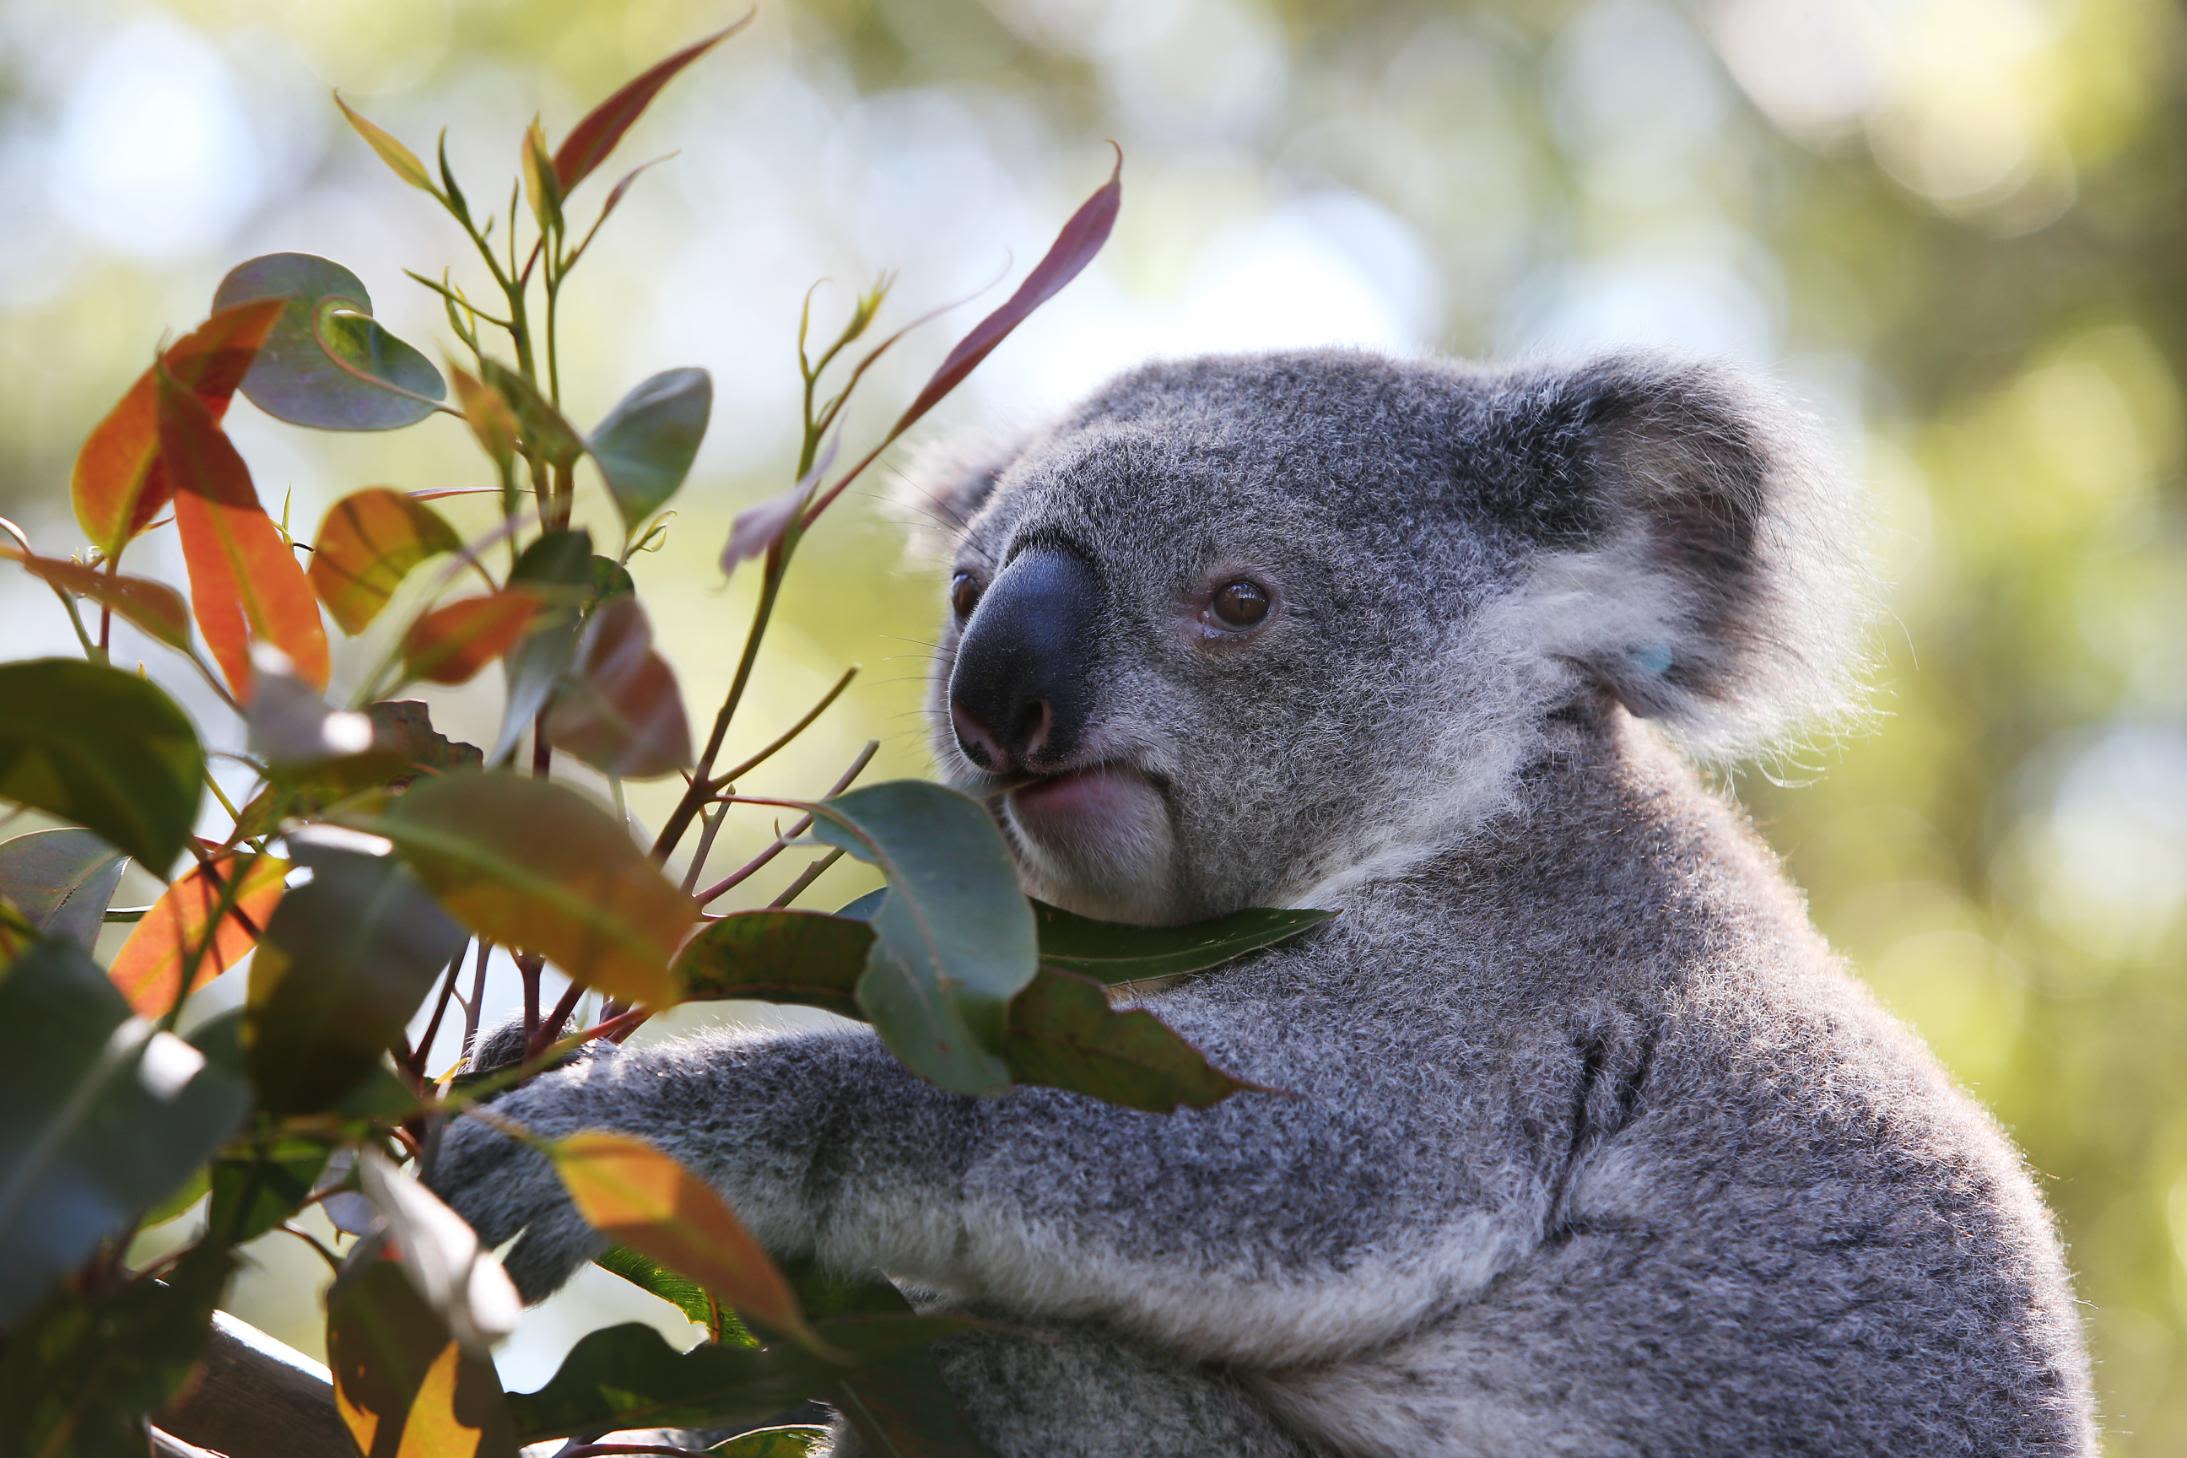 Koalas are both endangered and so plentiful they're causing problems. How'd  that happen?